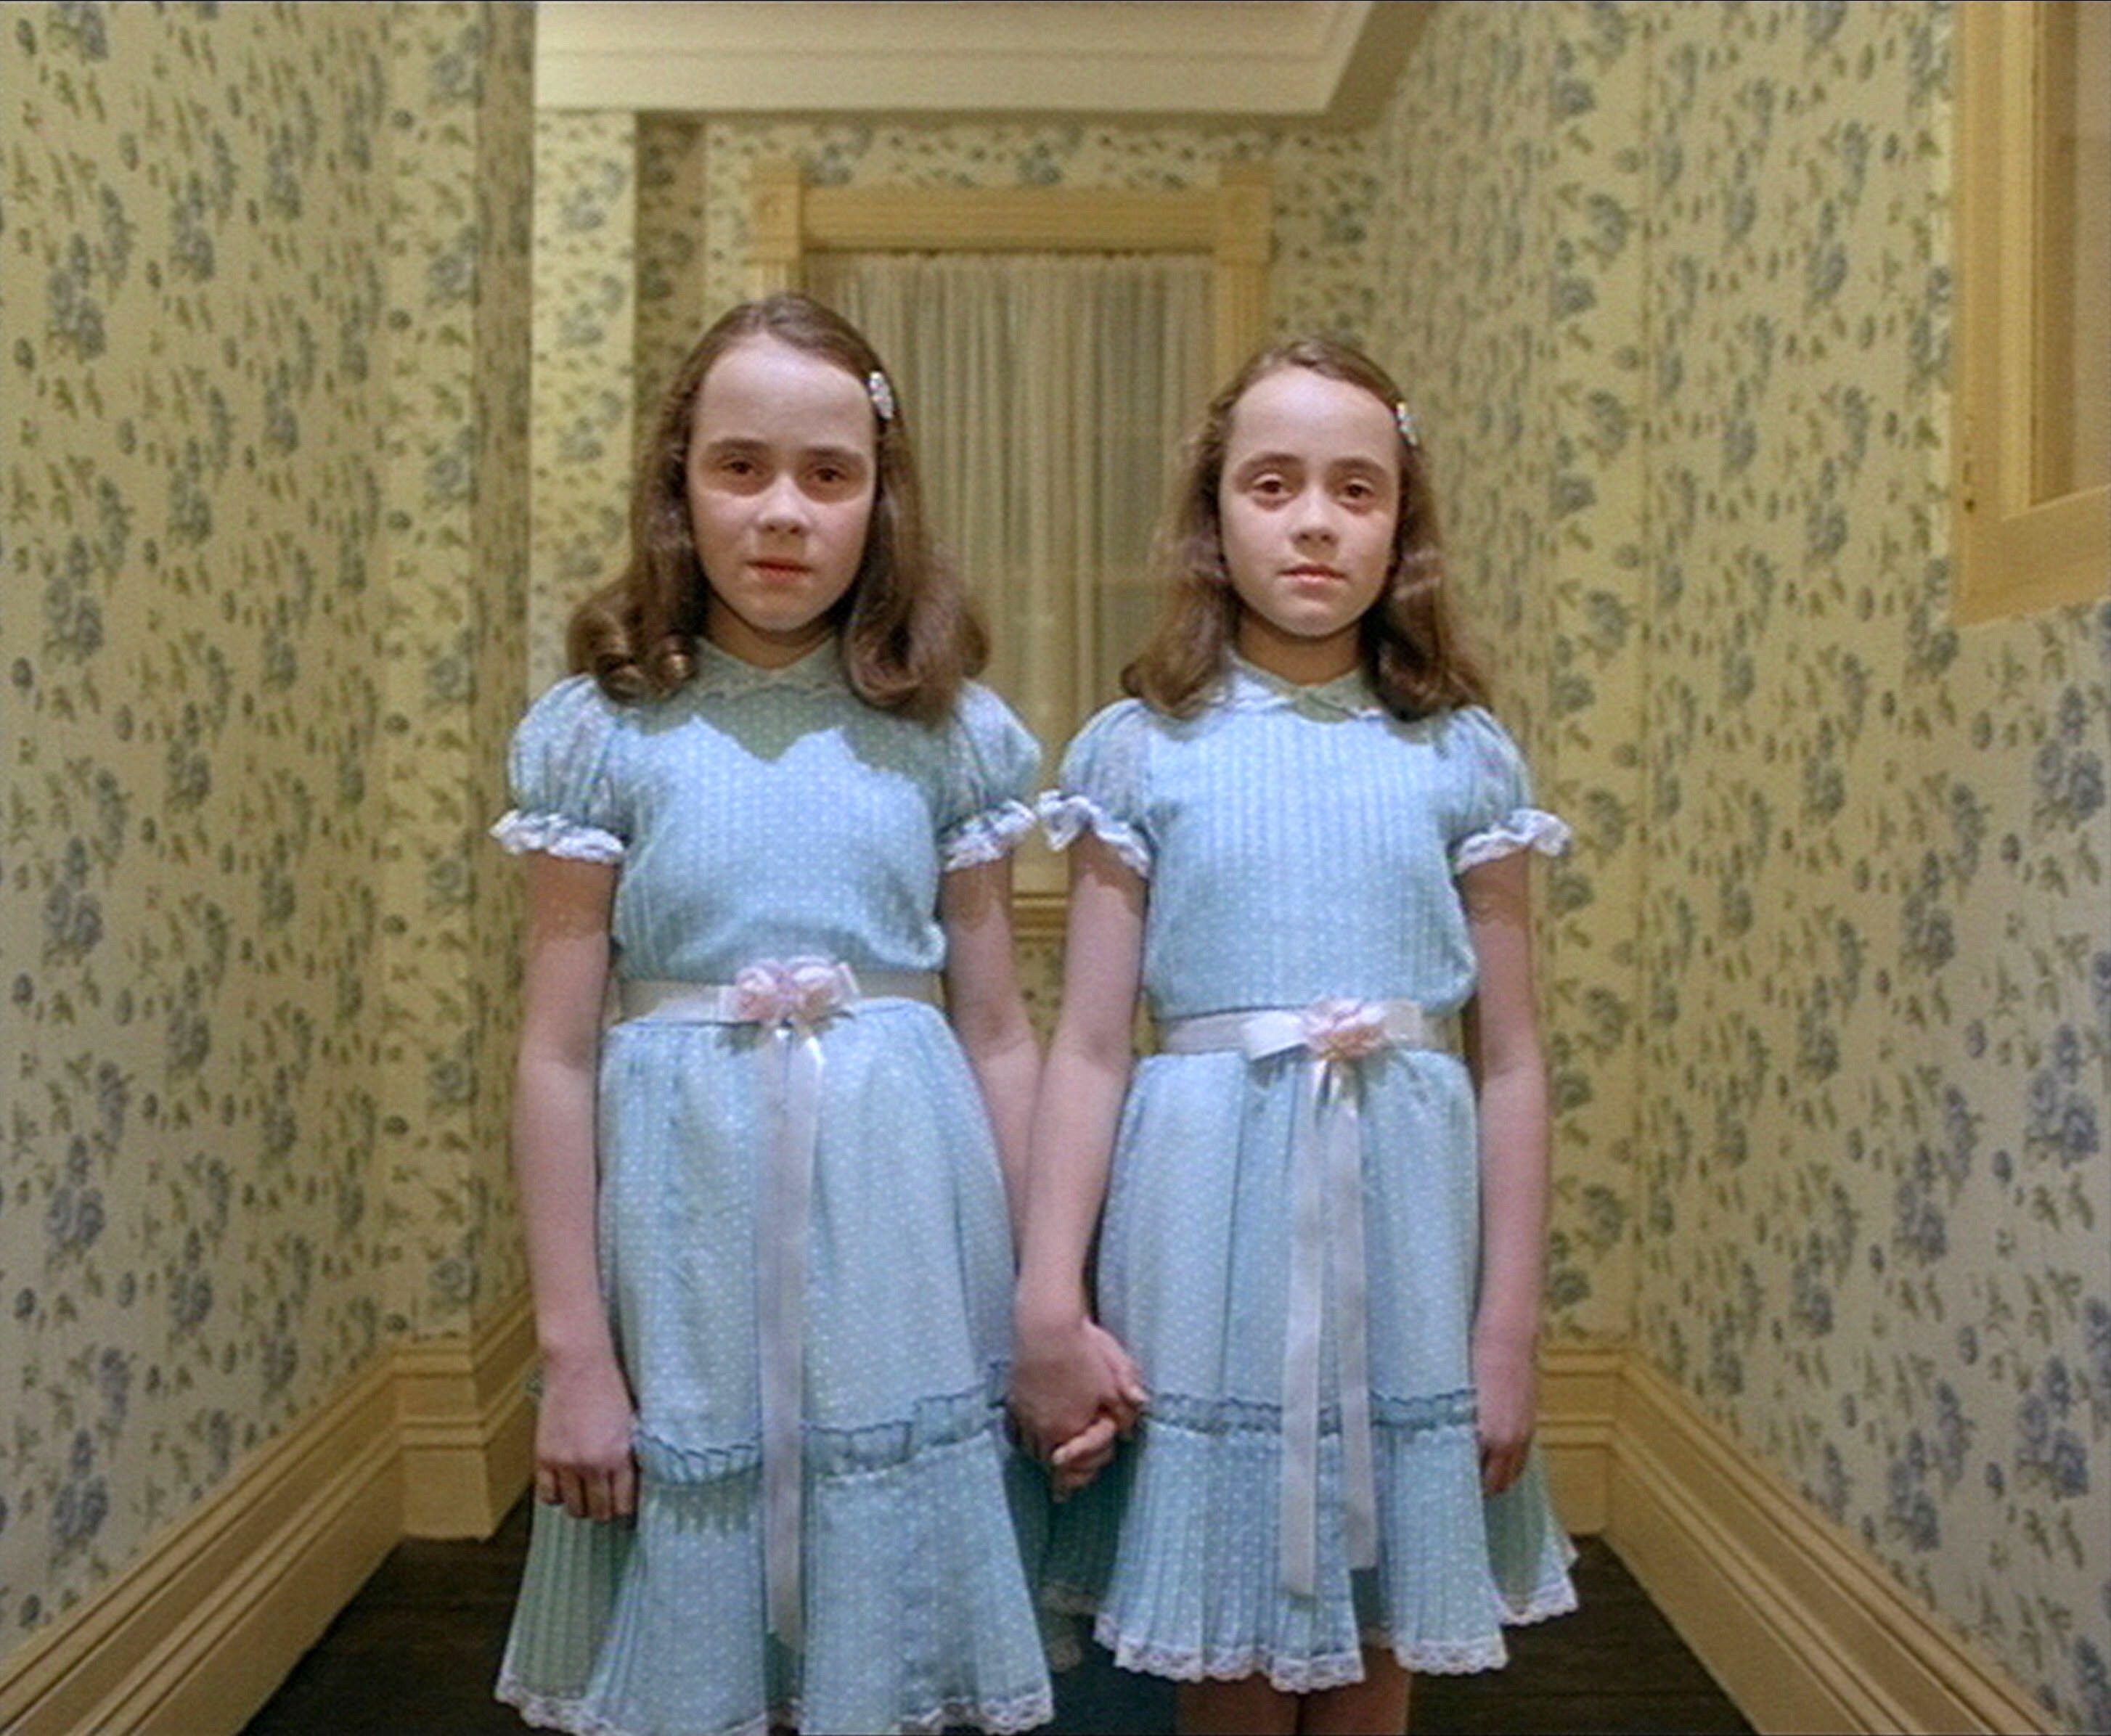 Twins in The Shining